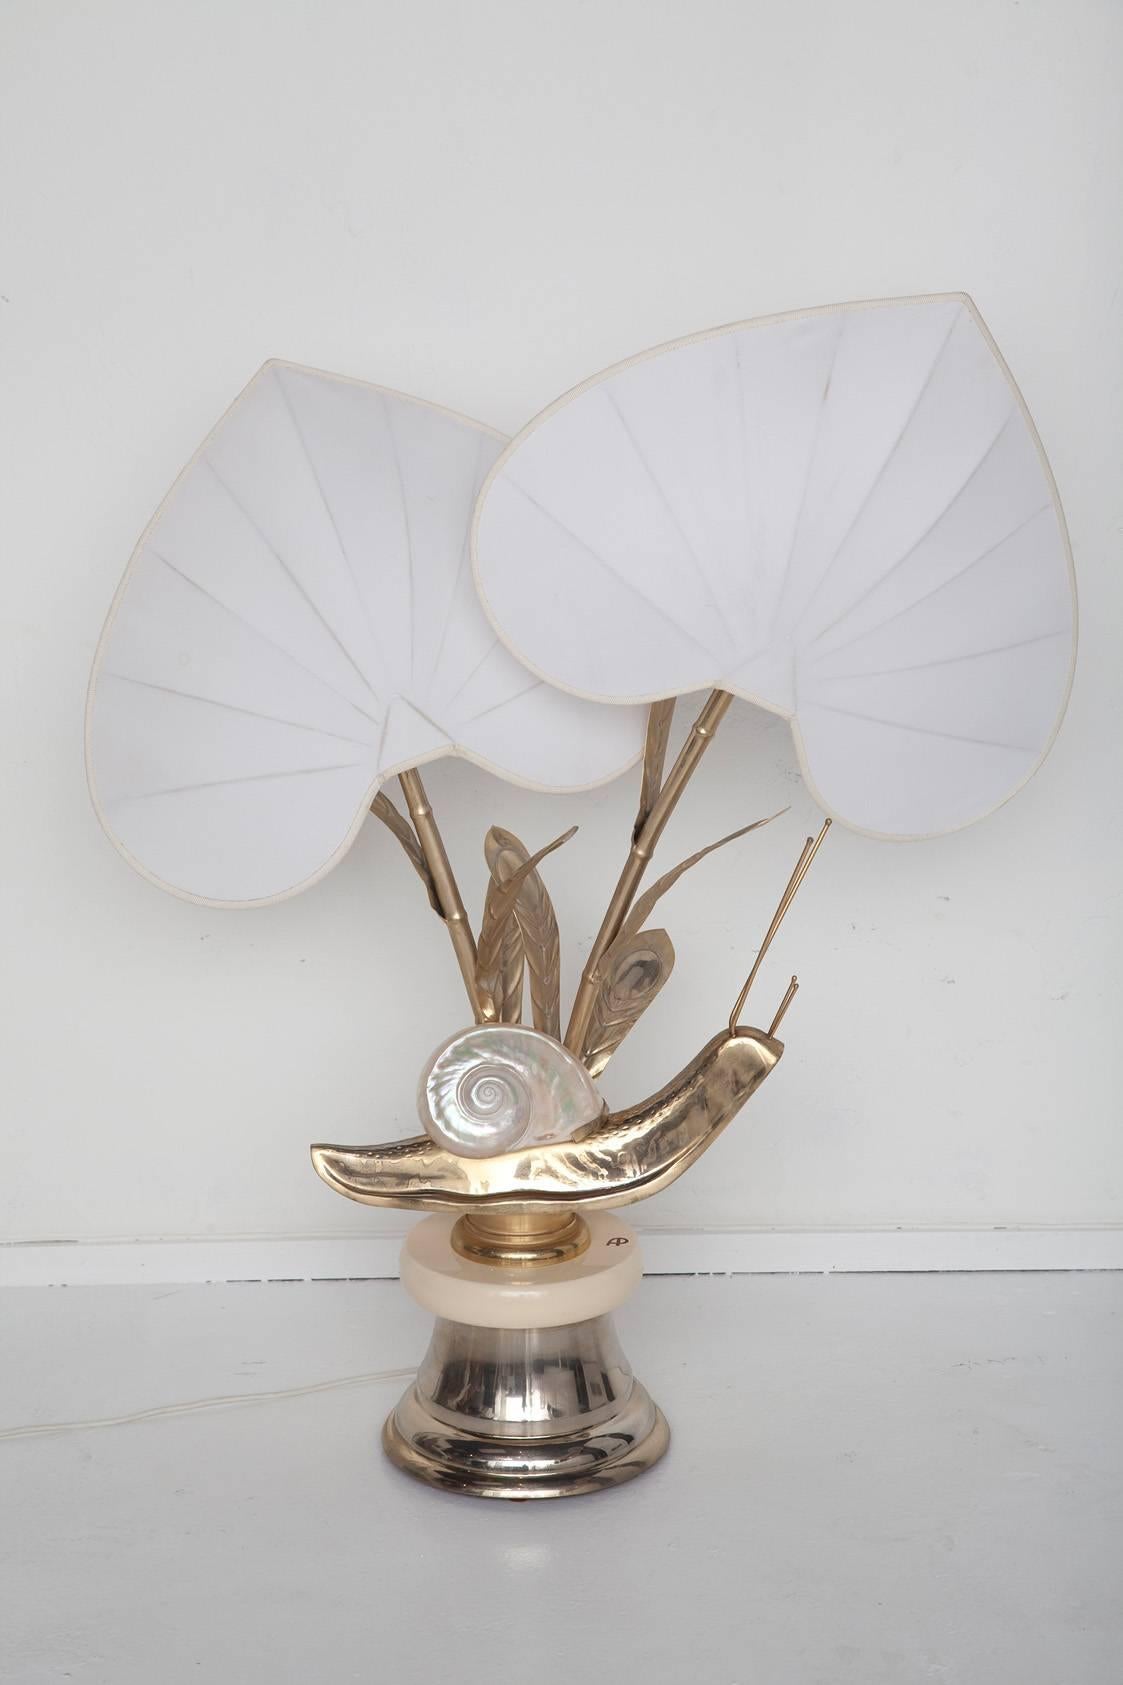 Whimsical over-scaled Italian brass snail table lamp by Antonio Pavia, circa 1975,  sports a shimmering mother-of-pearl nautilus shell and original leaf-shaped silk shades. Signed AP on the cream enamel base. U.S. wiring.